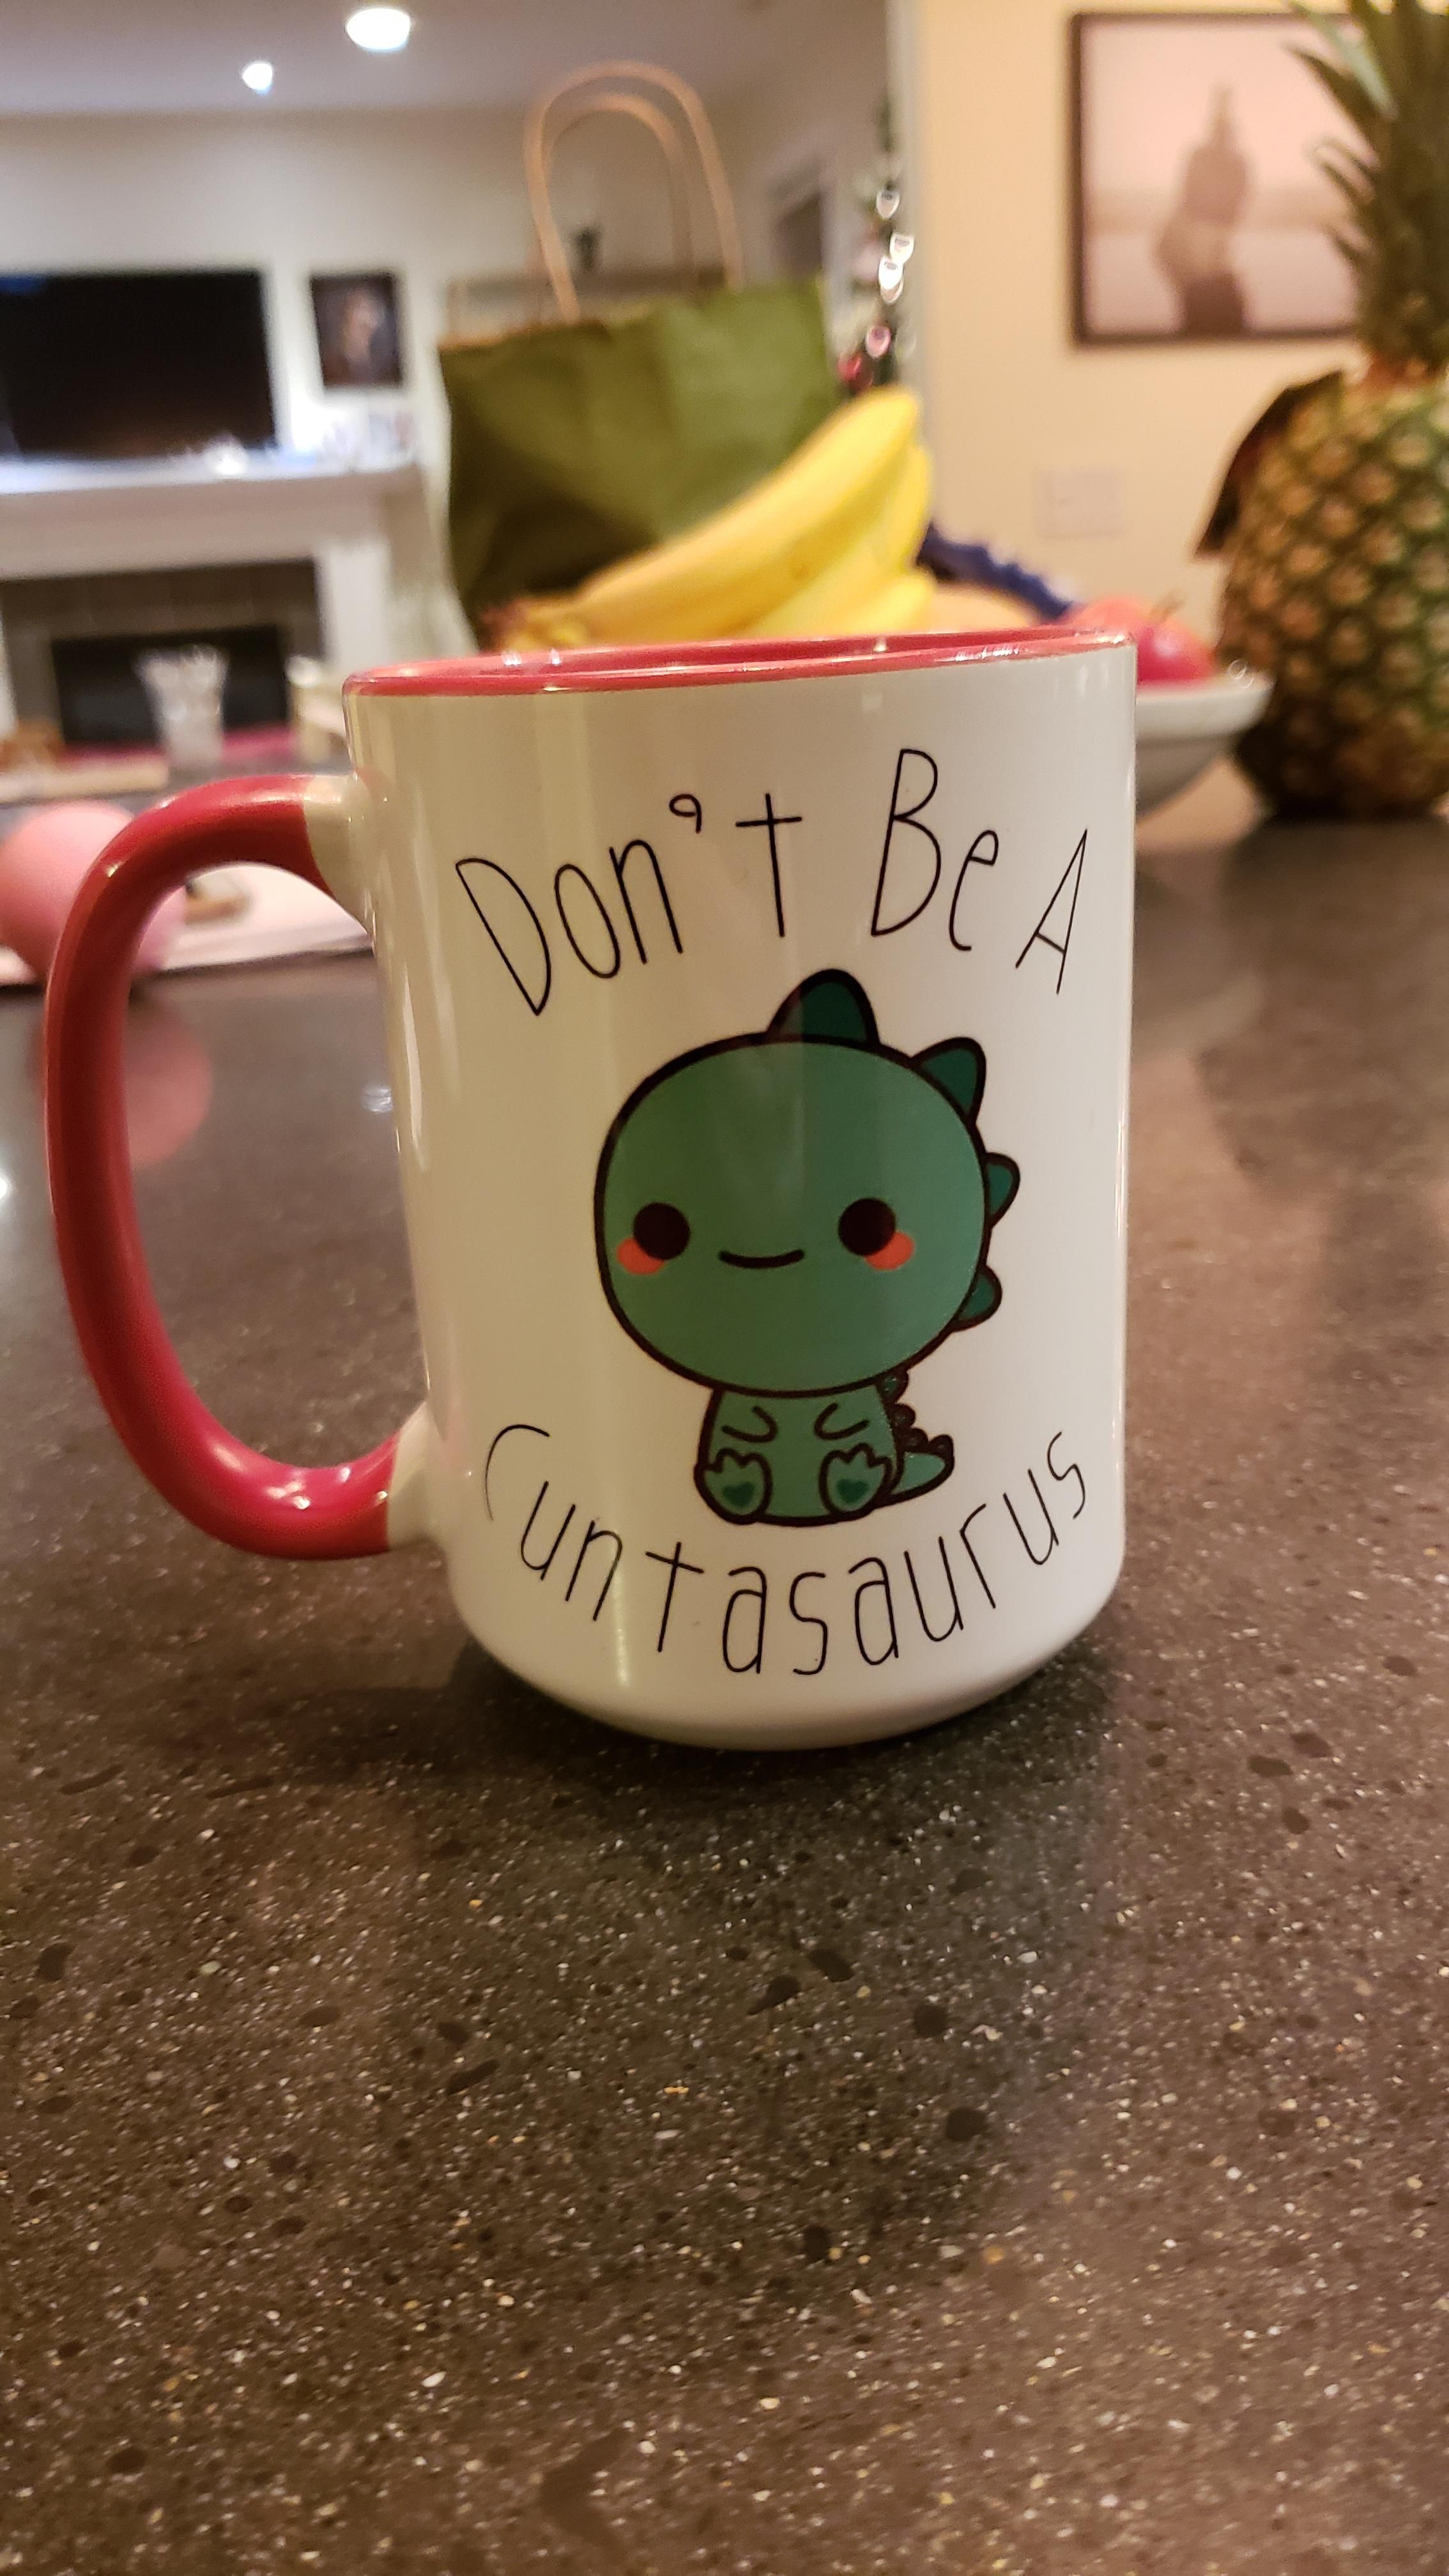 This mug that my mom bought my dad